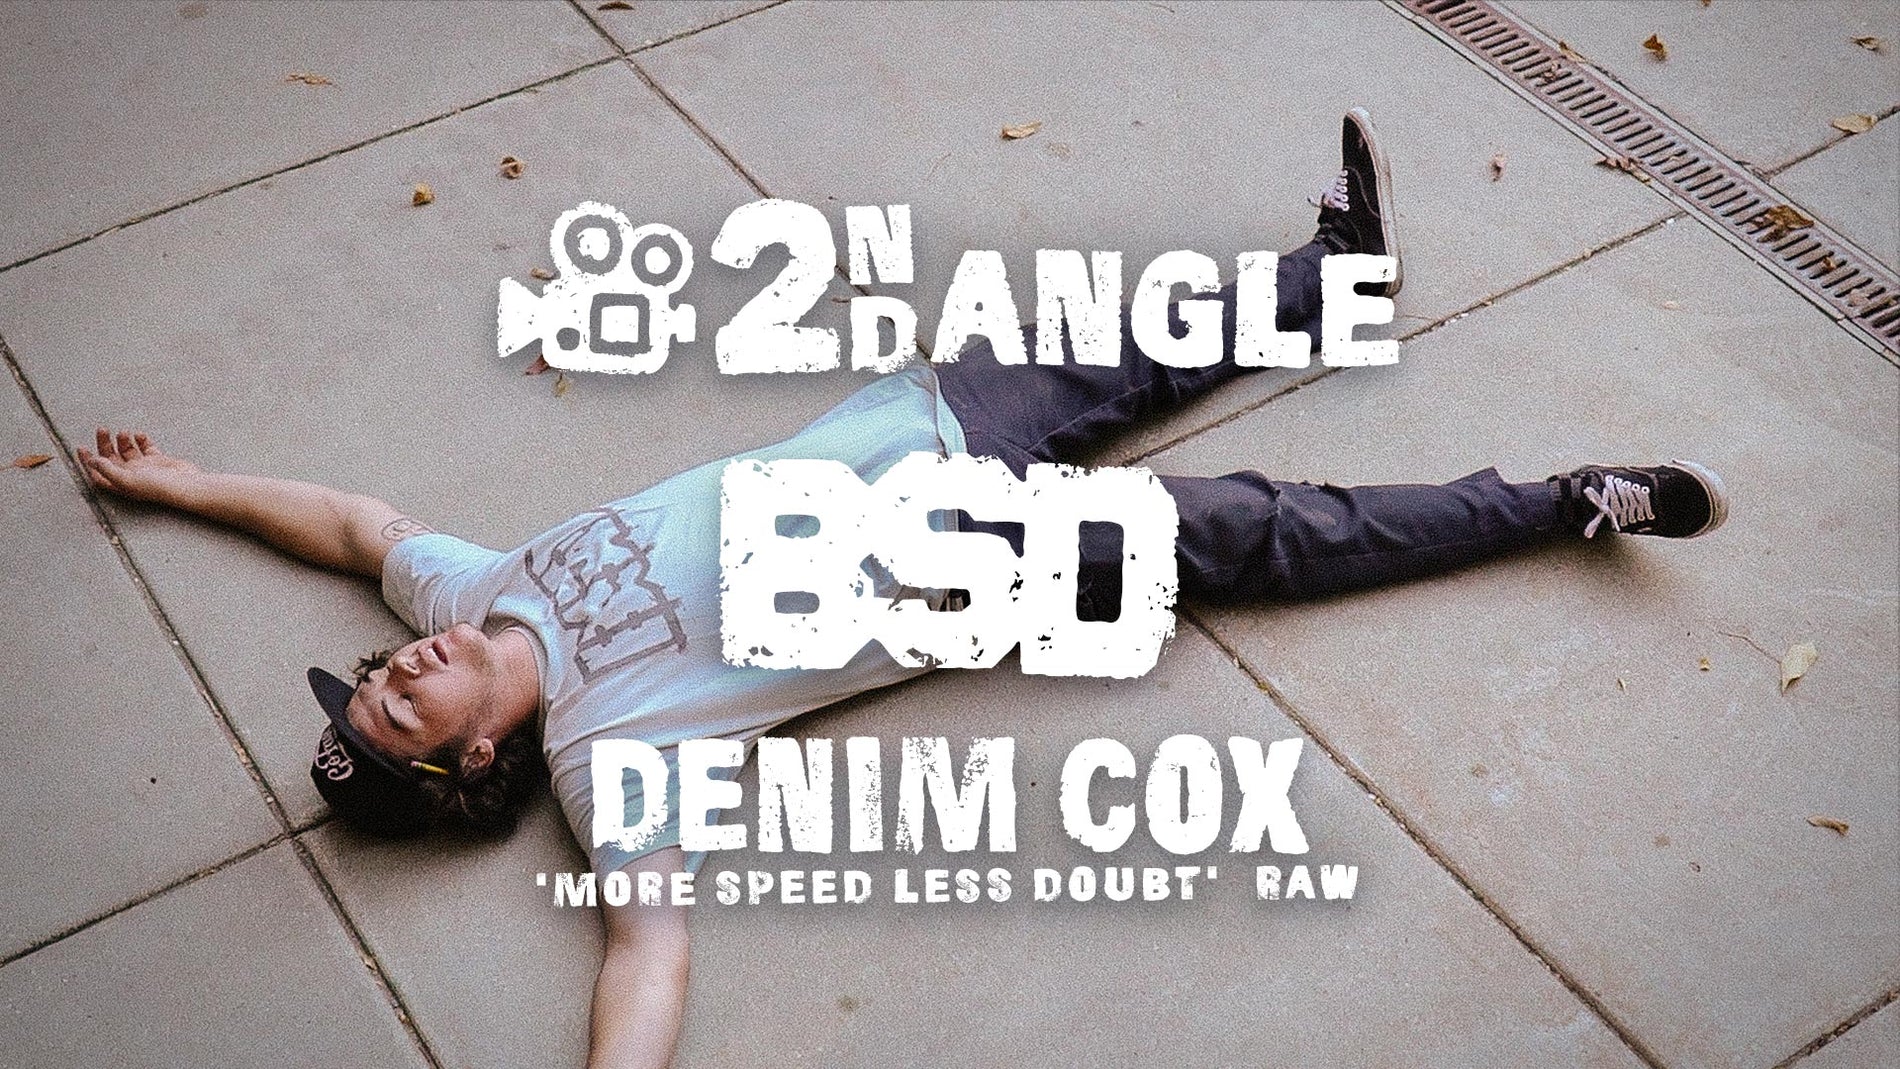 2ND ANGLE - DENIM COX 'MORE SPEED LESS DOUBT' RAW